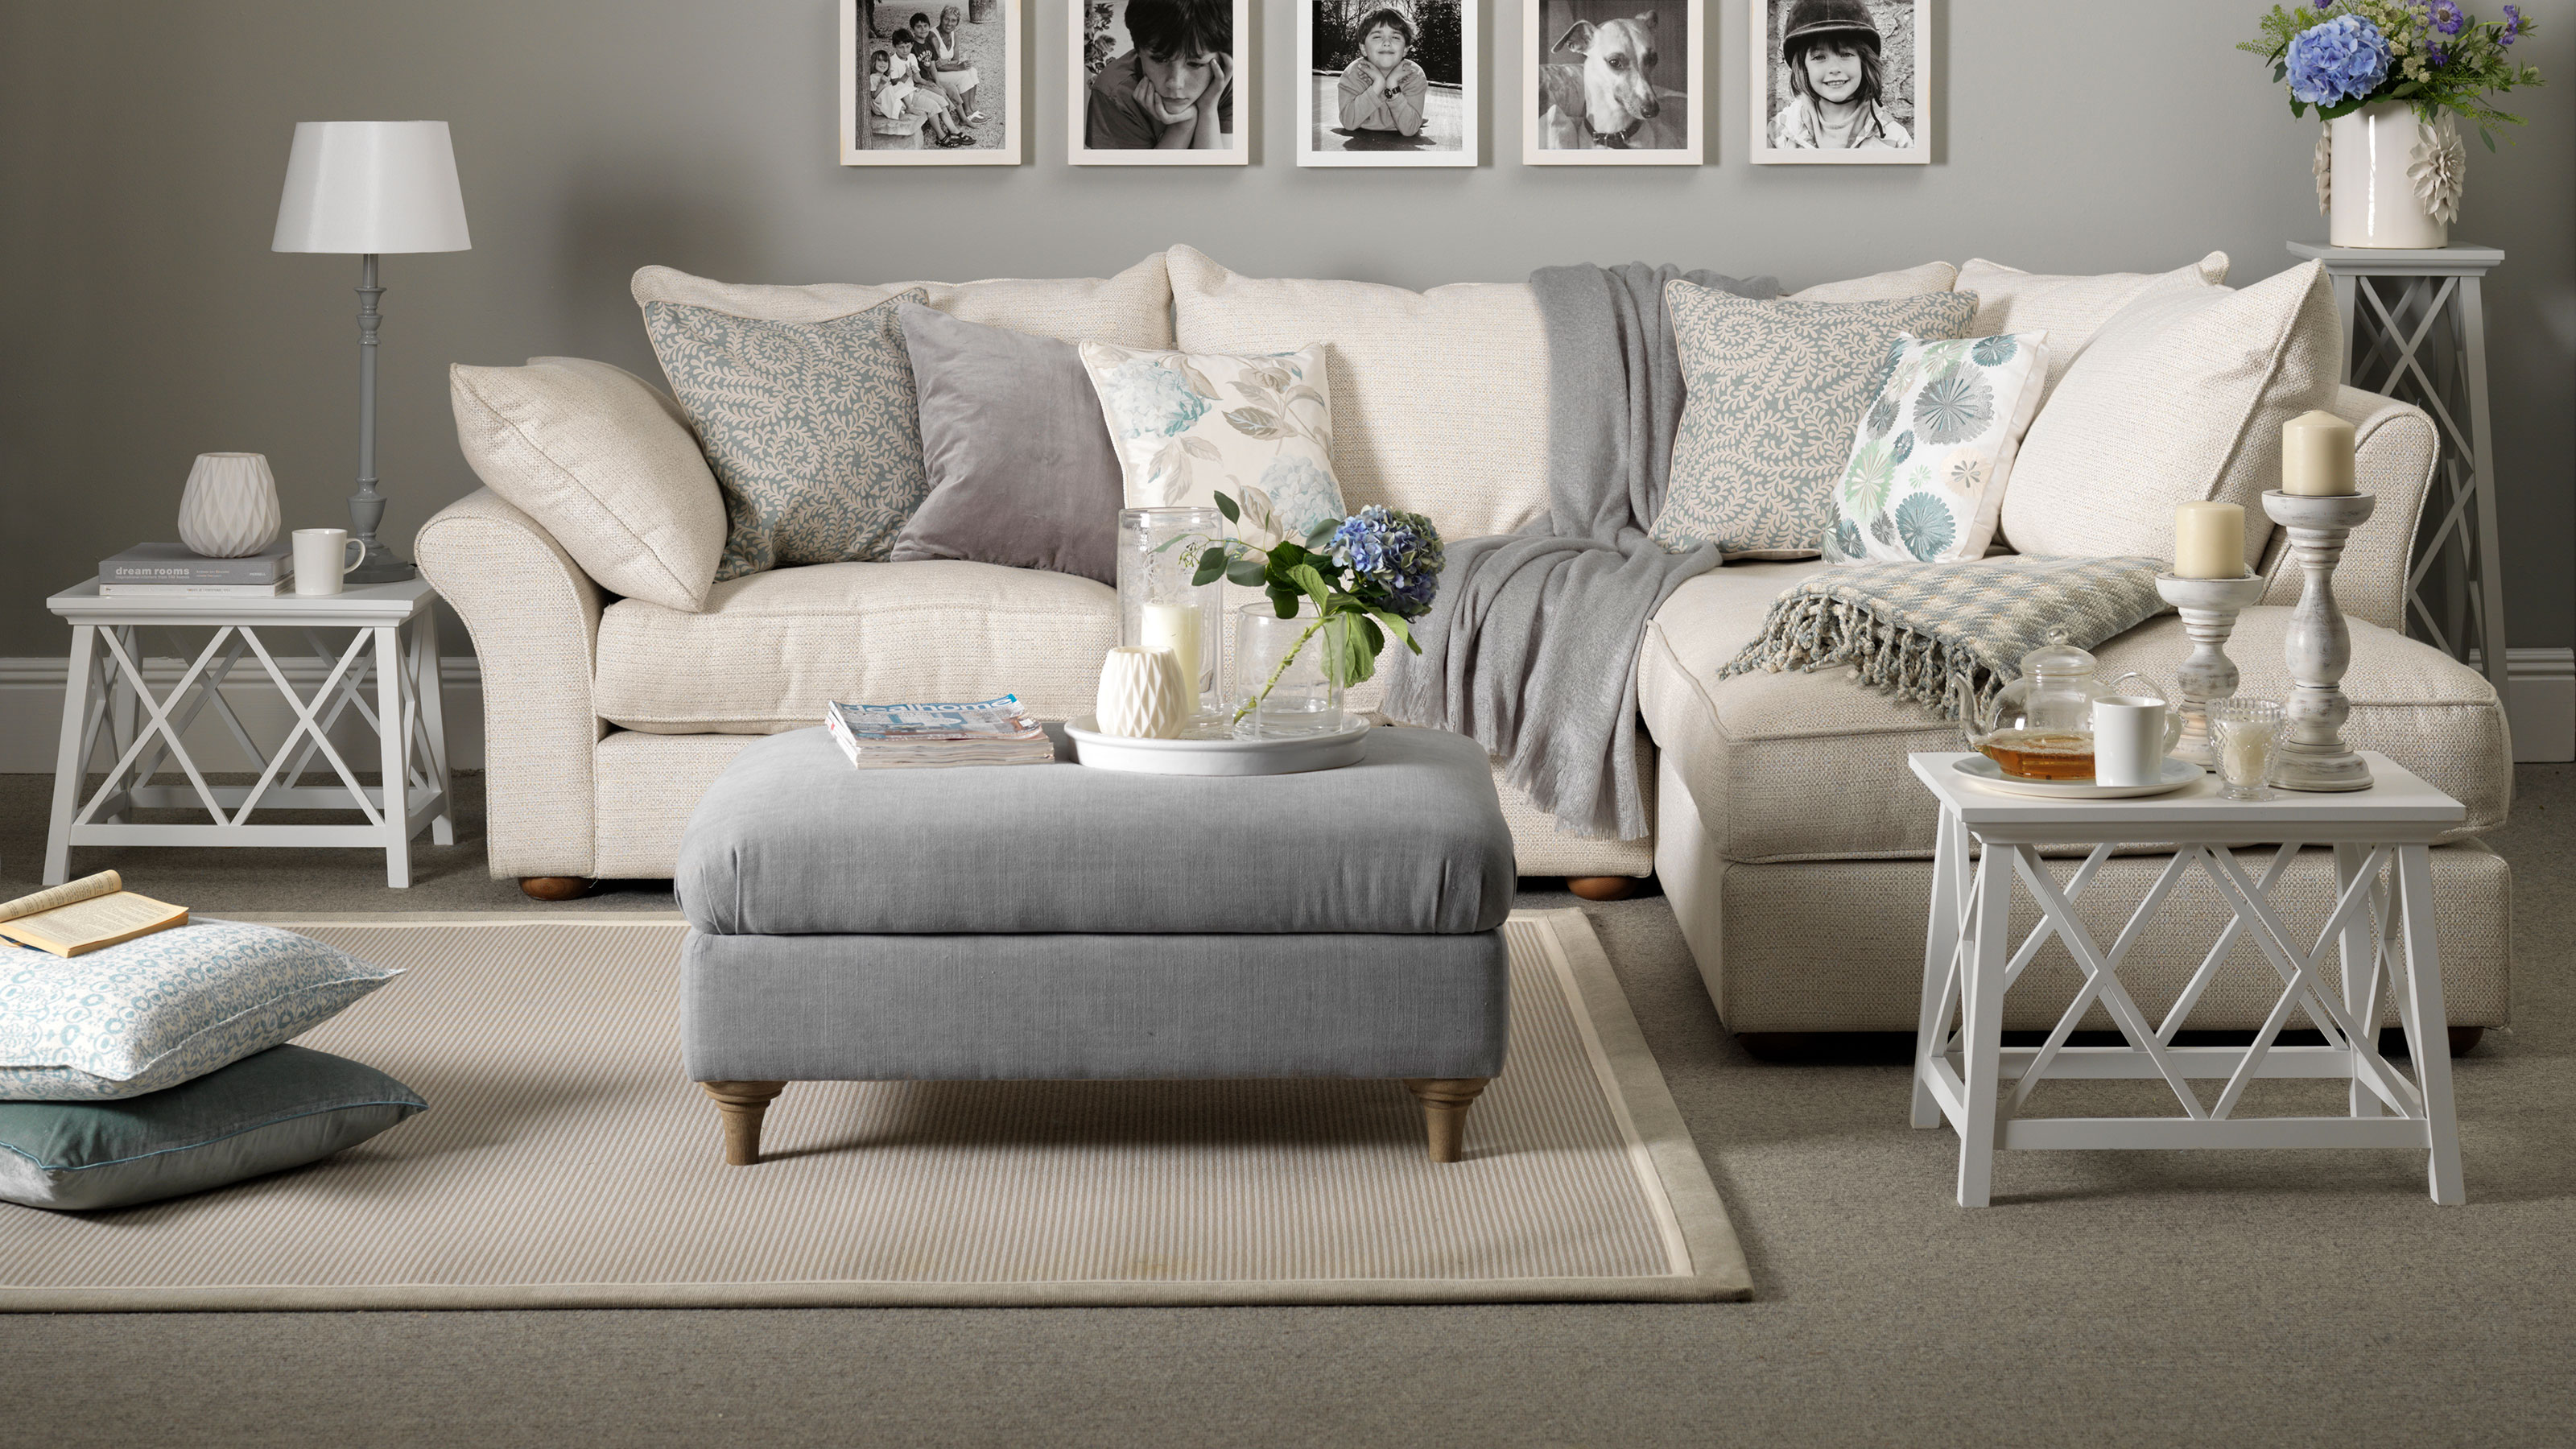 Grey Carpet Living Room Ideas 14 Ways To Start Your Scheme From The Floor Up Ideal Home